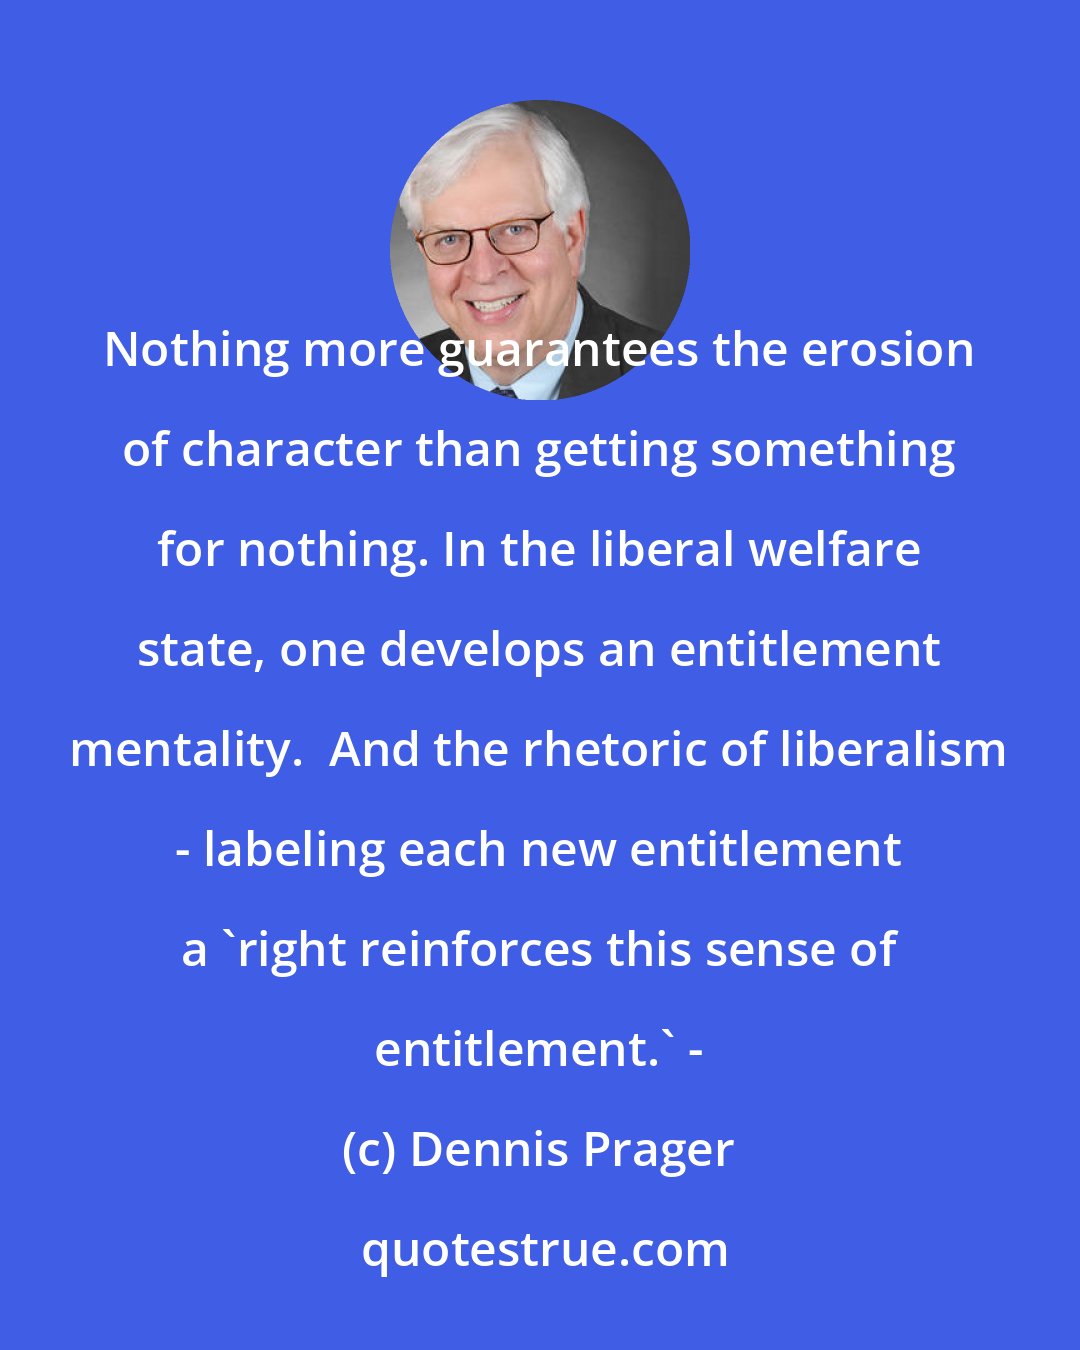 Dennis Prager: Nothing more guarantees the erosion of character than getting something for nothing. In the liberal welfare state, one develops an entitlement mentality.  And the rhetoric of liberalism - labeling each new entitlement a 'right reinforces this sense of entitlement.' -